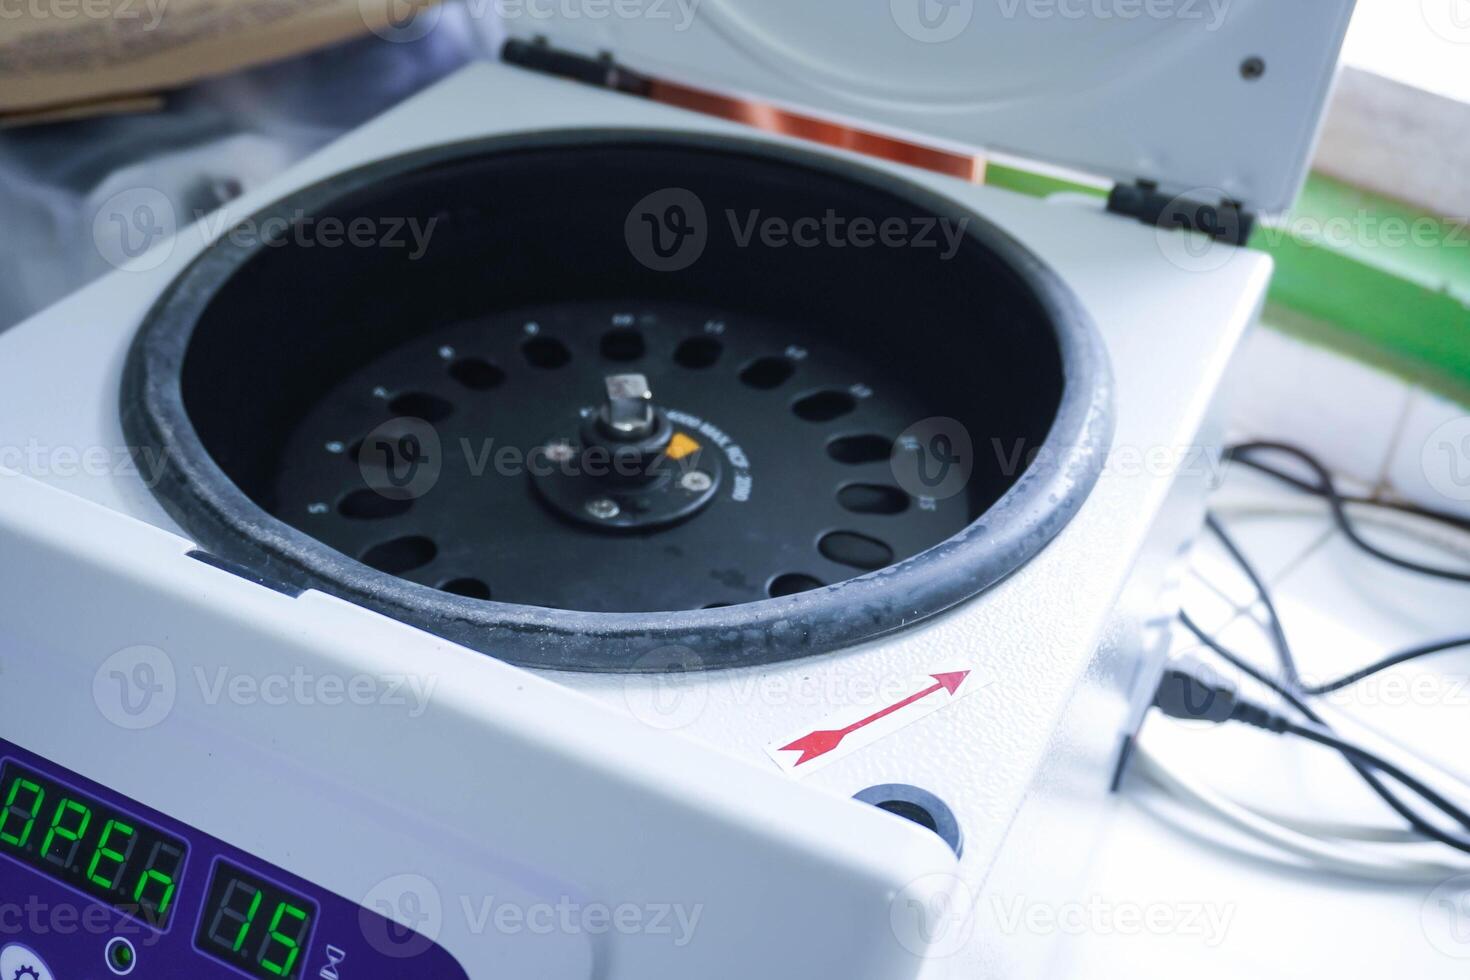 Laboratory equipment. Open laboratory centrifuge. White medical centrifuge with digital panel. Device for laboratory research. Modern lab technologies photo